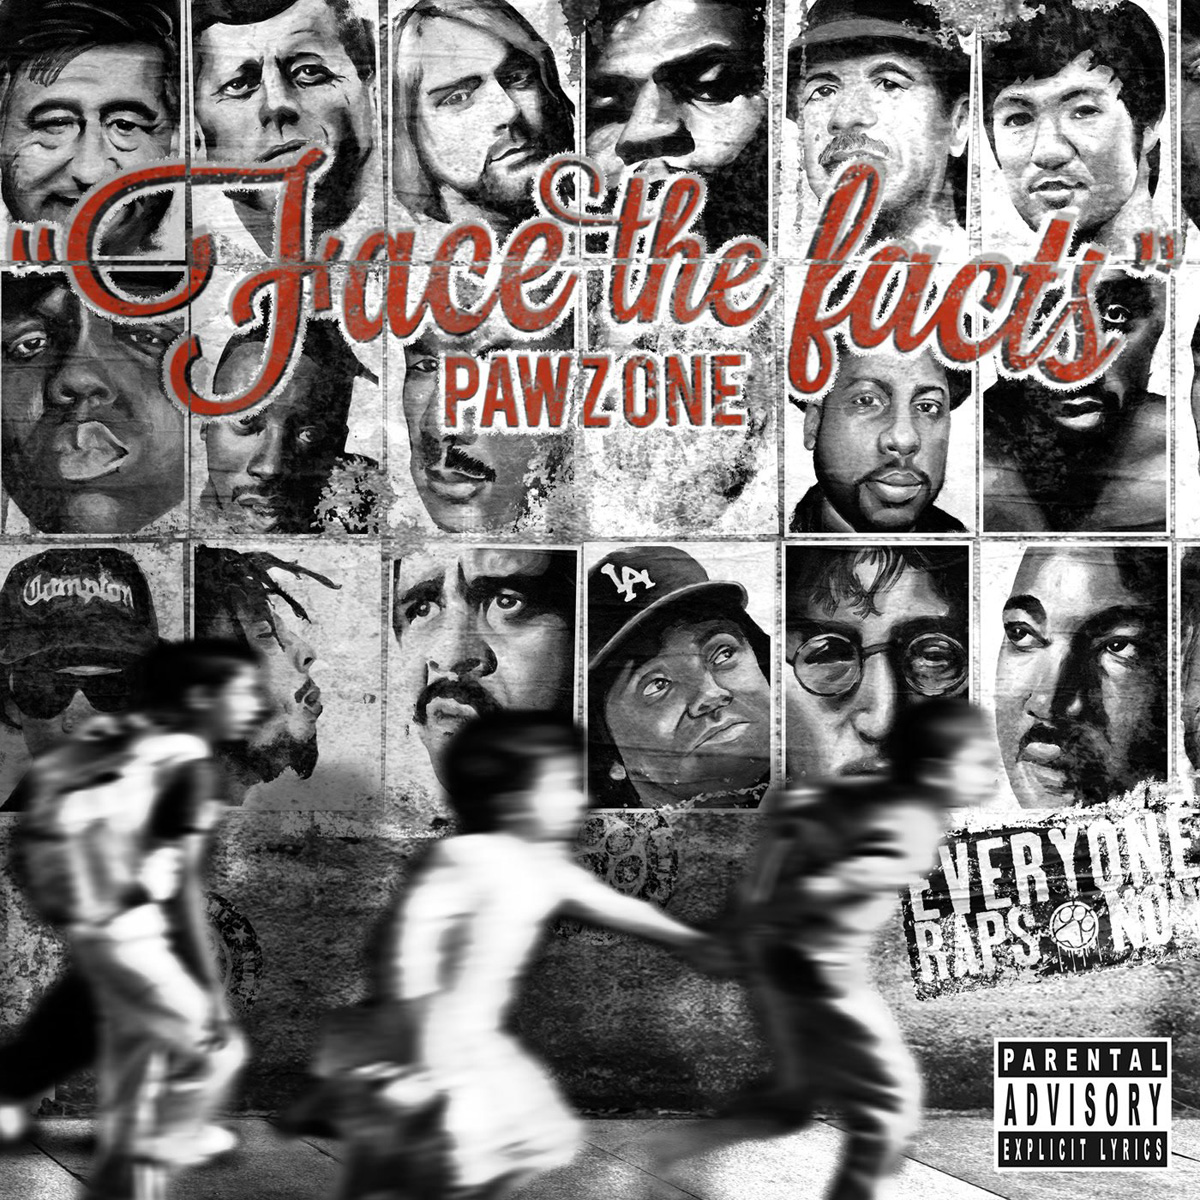 Pawz One “Face The Facts” Album Release via Below Systems